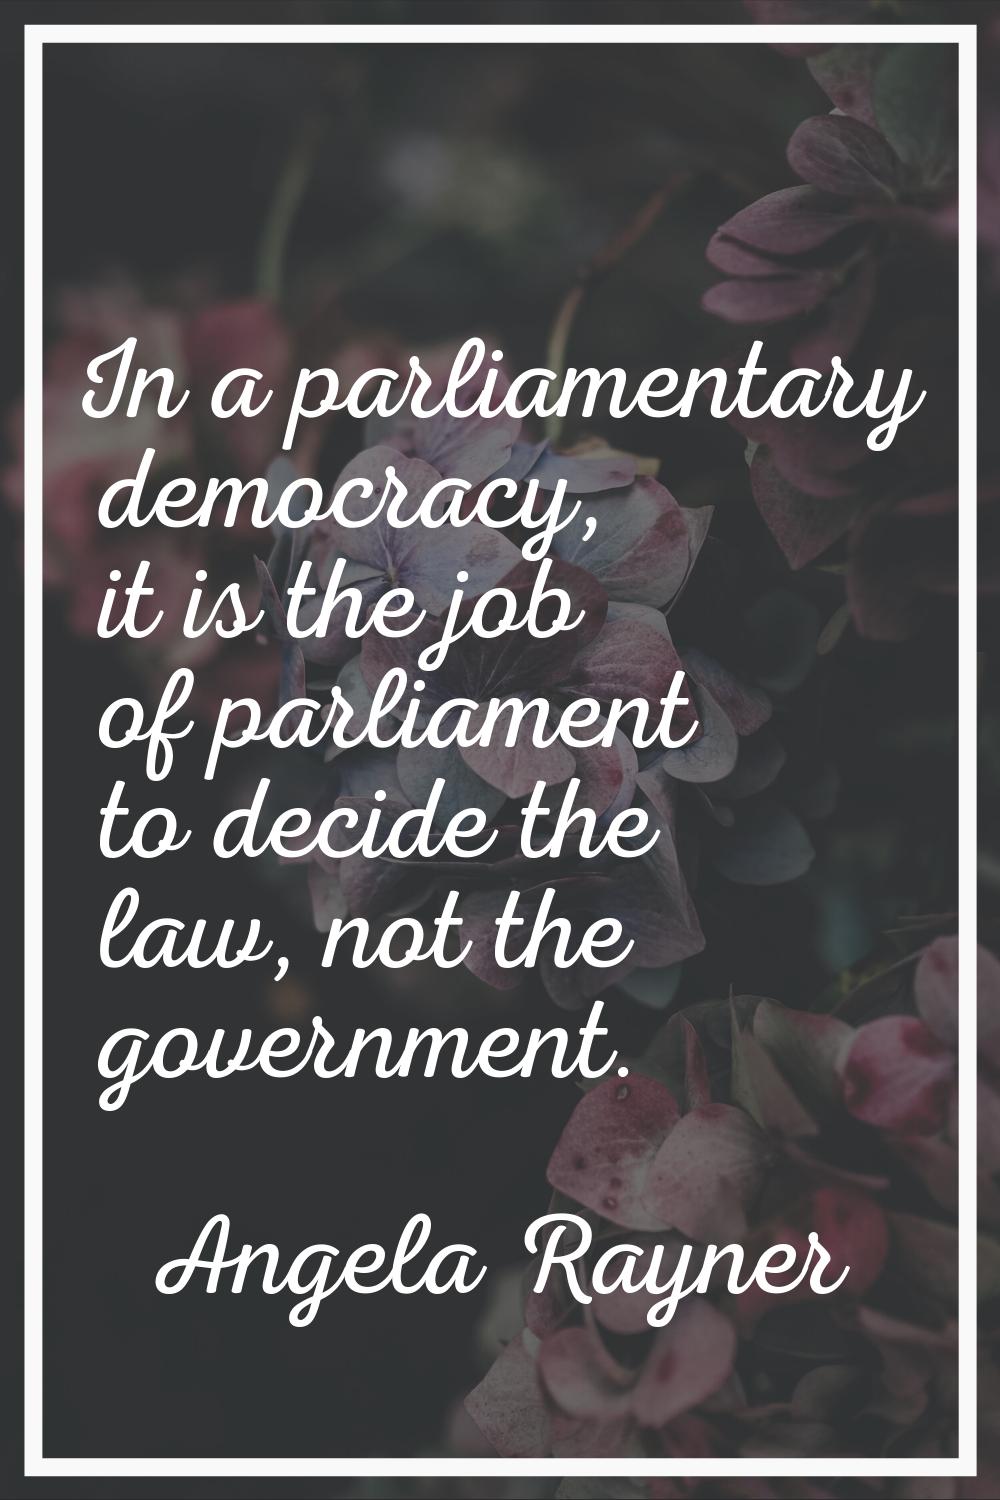 In a parliamentary democracy, it is the job of parliament to decide the law, not the government.